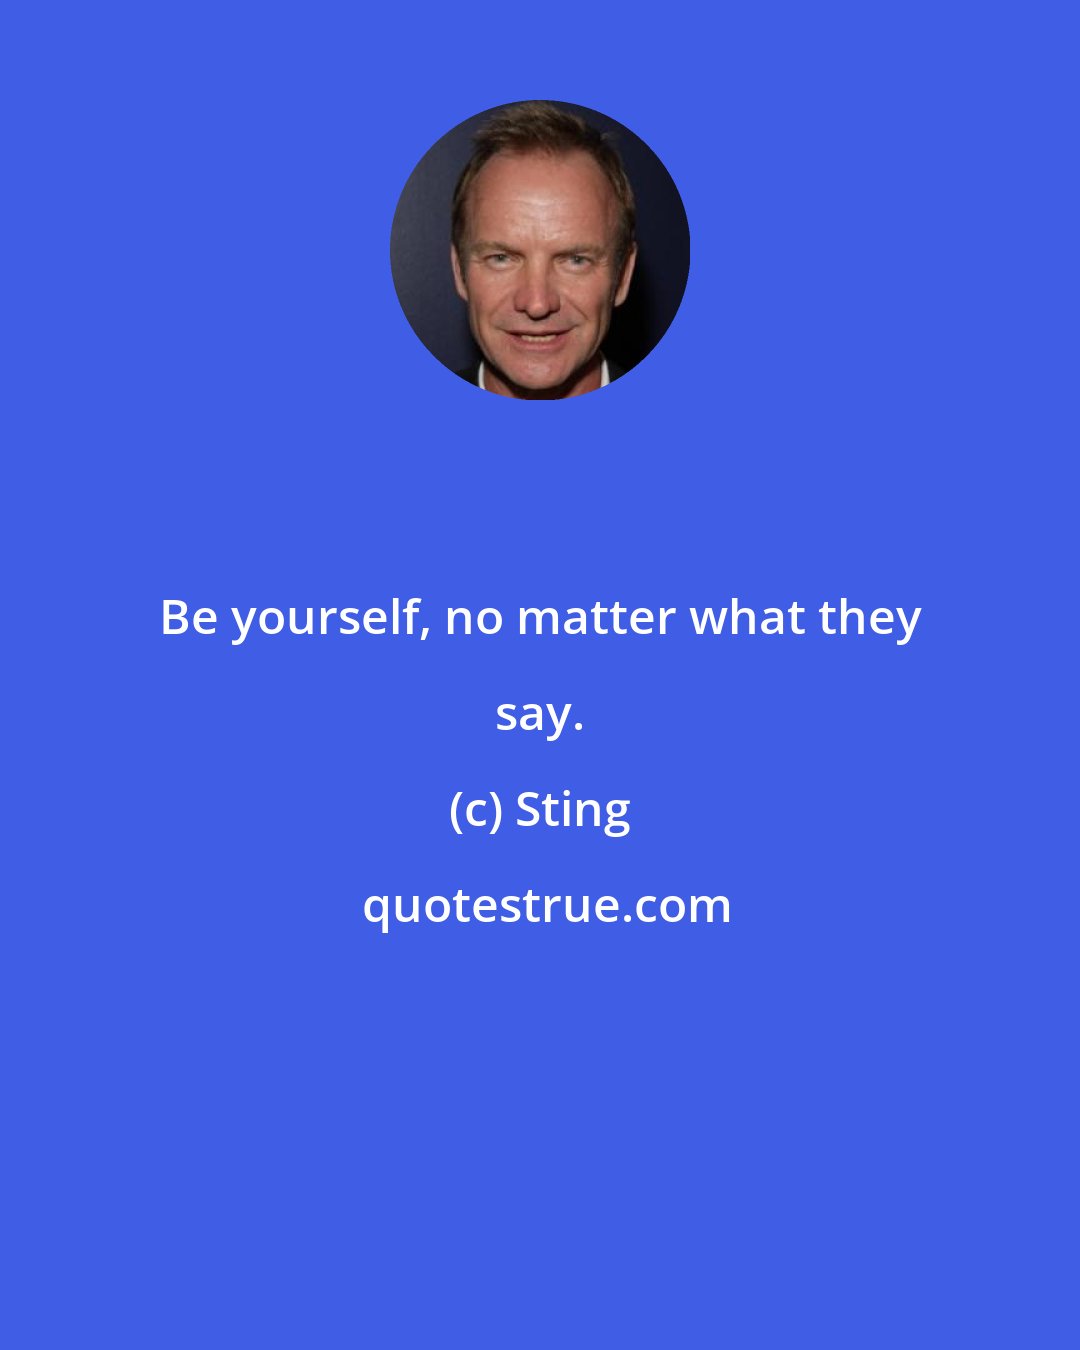 Sting: Be yourself, no matter what they say.